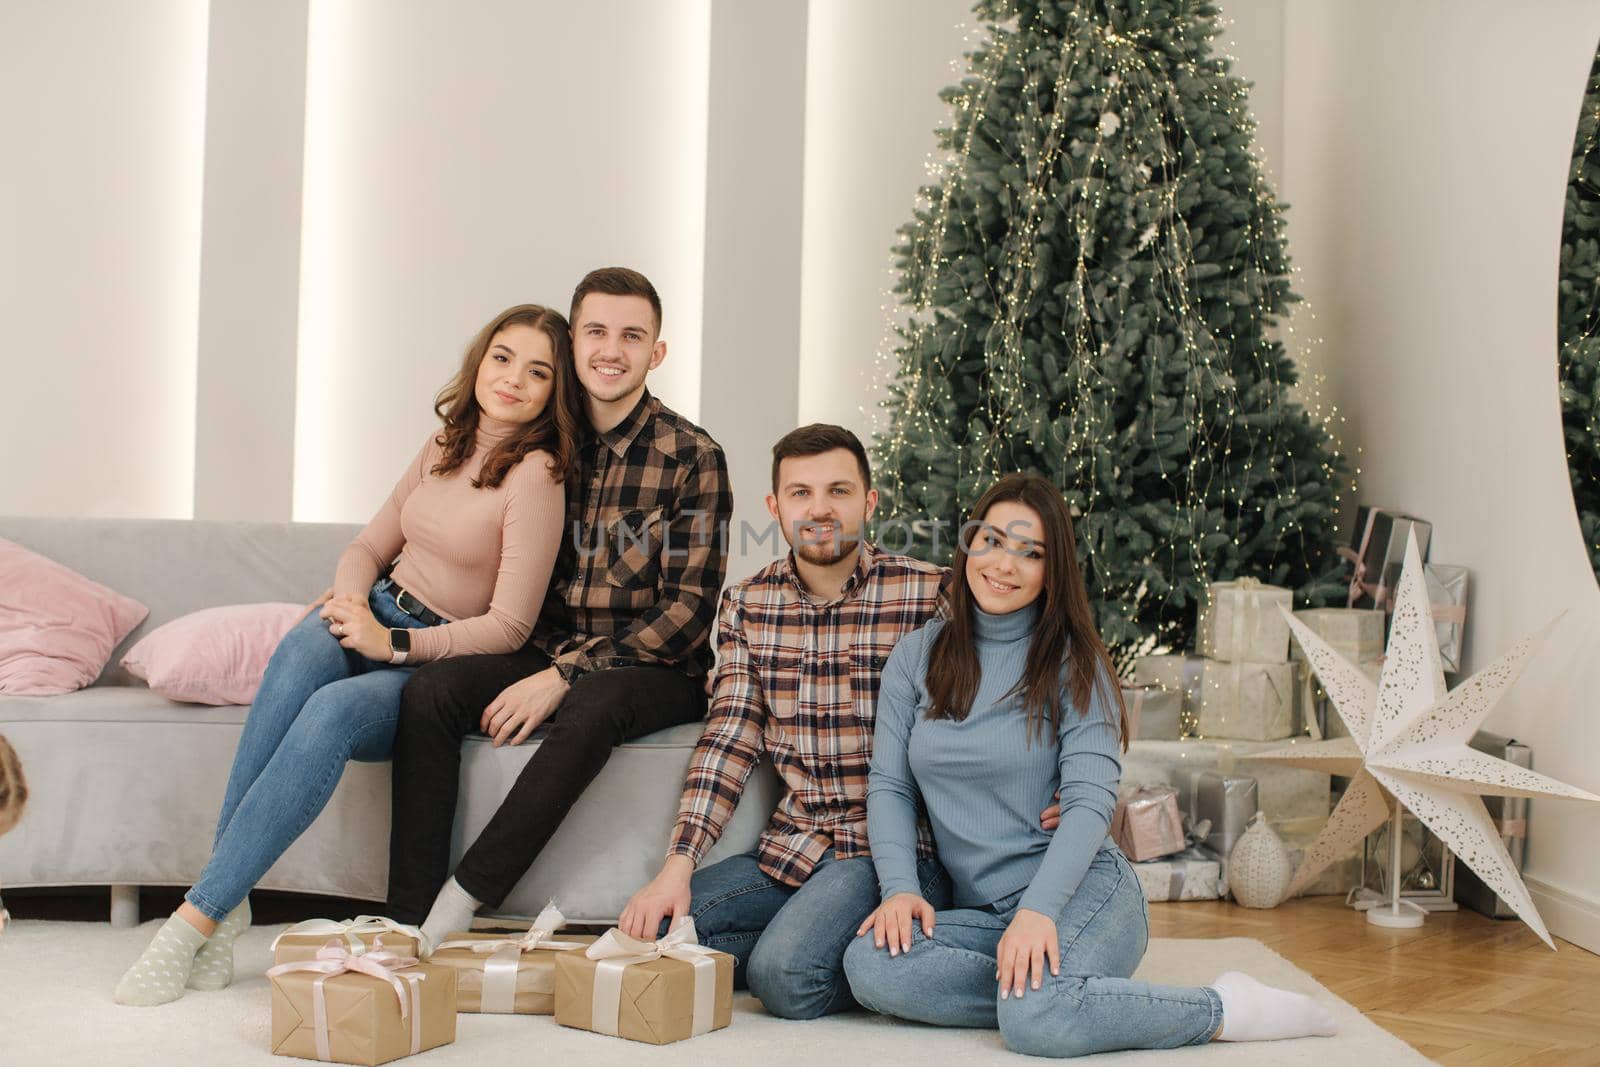 Two brother with their wifes at New Year photosession. Beautiful woman and man in front of fir tree. Christmas mood.